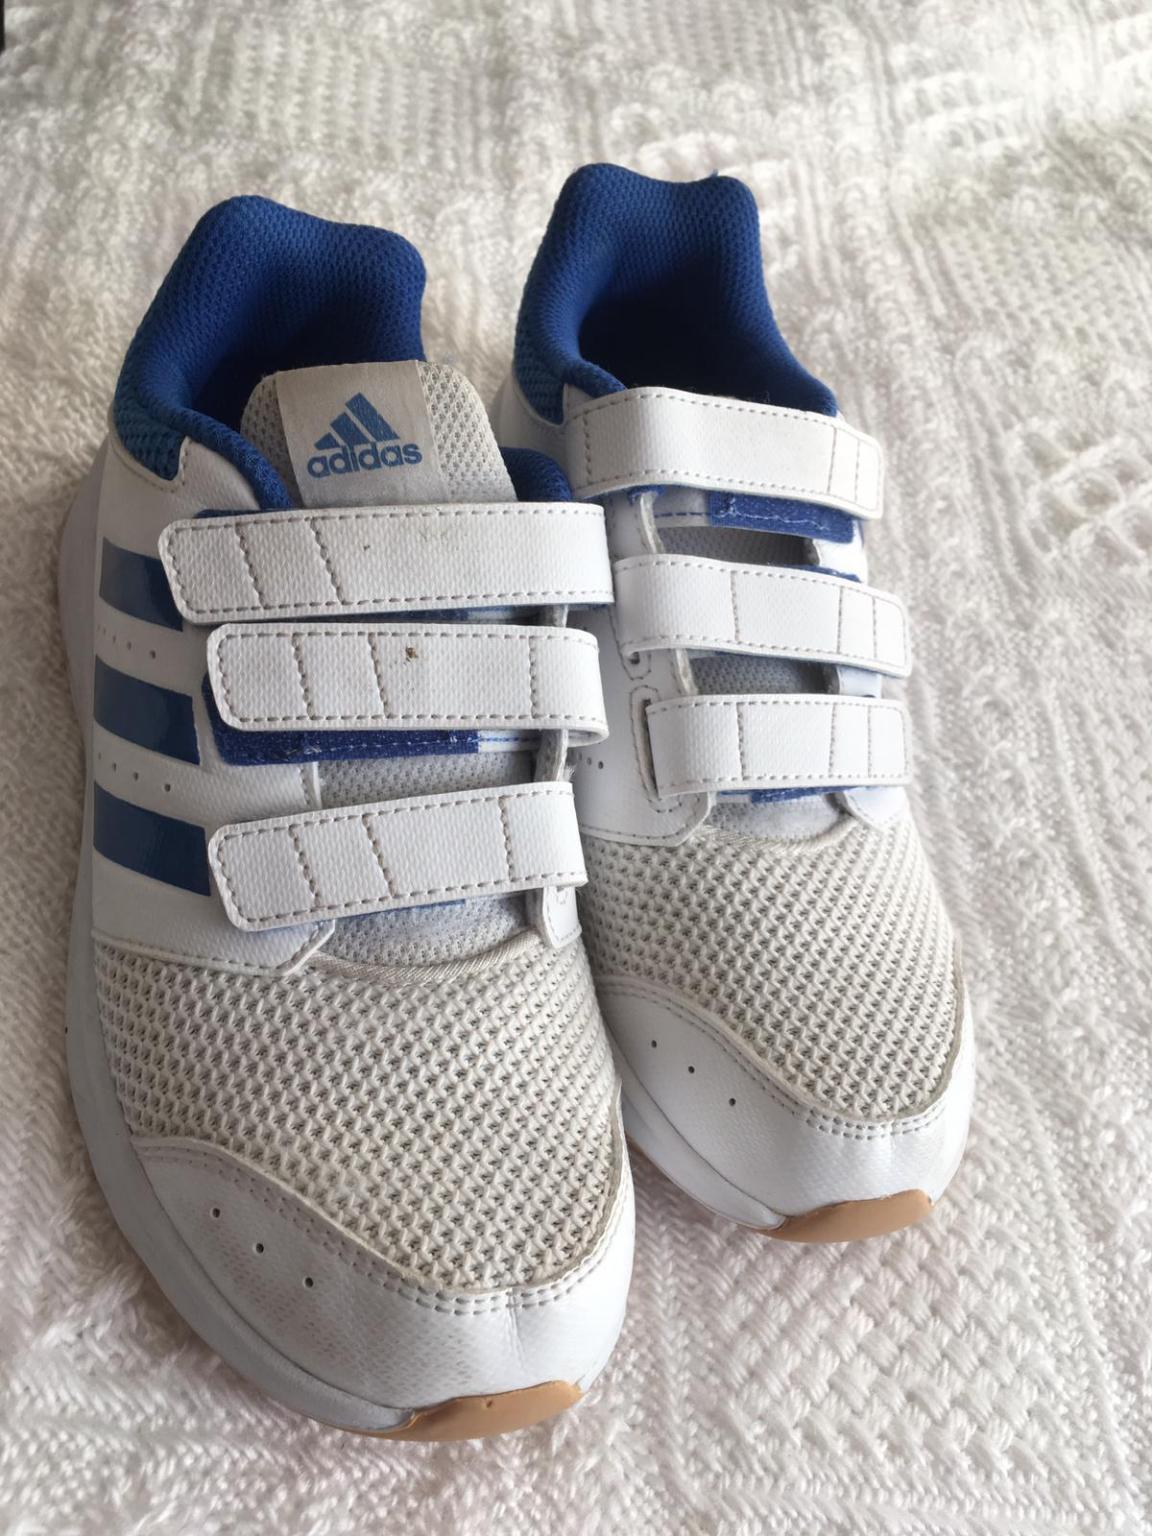 Adidas Sportschuhe Jungen in 6323 Bad Häring for €30.00 for sale | Shpock